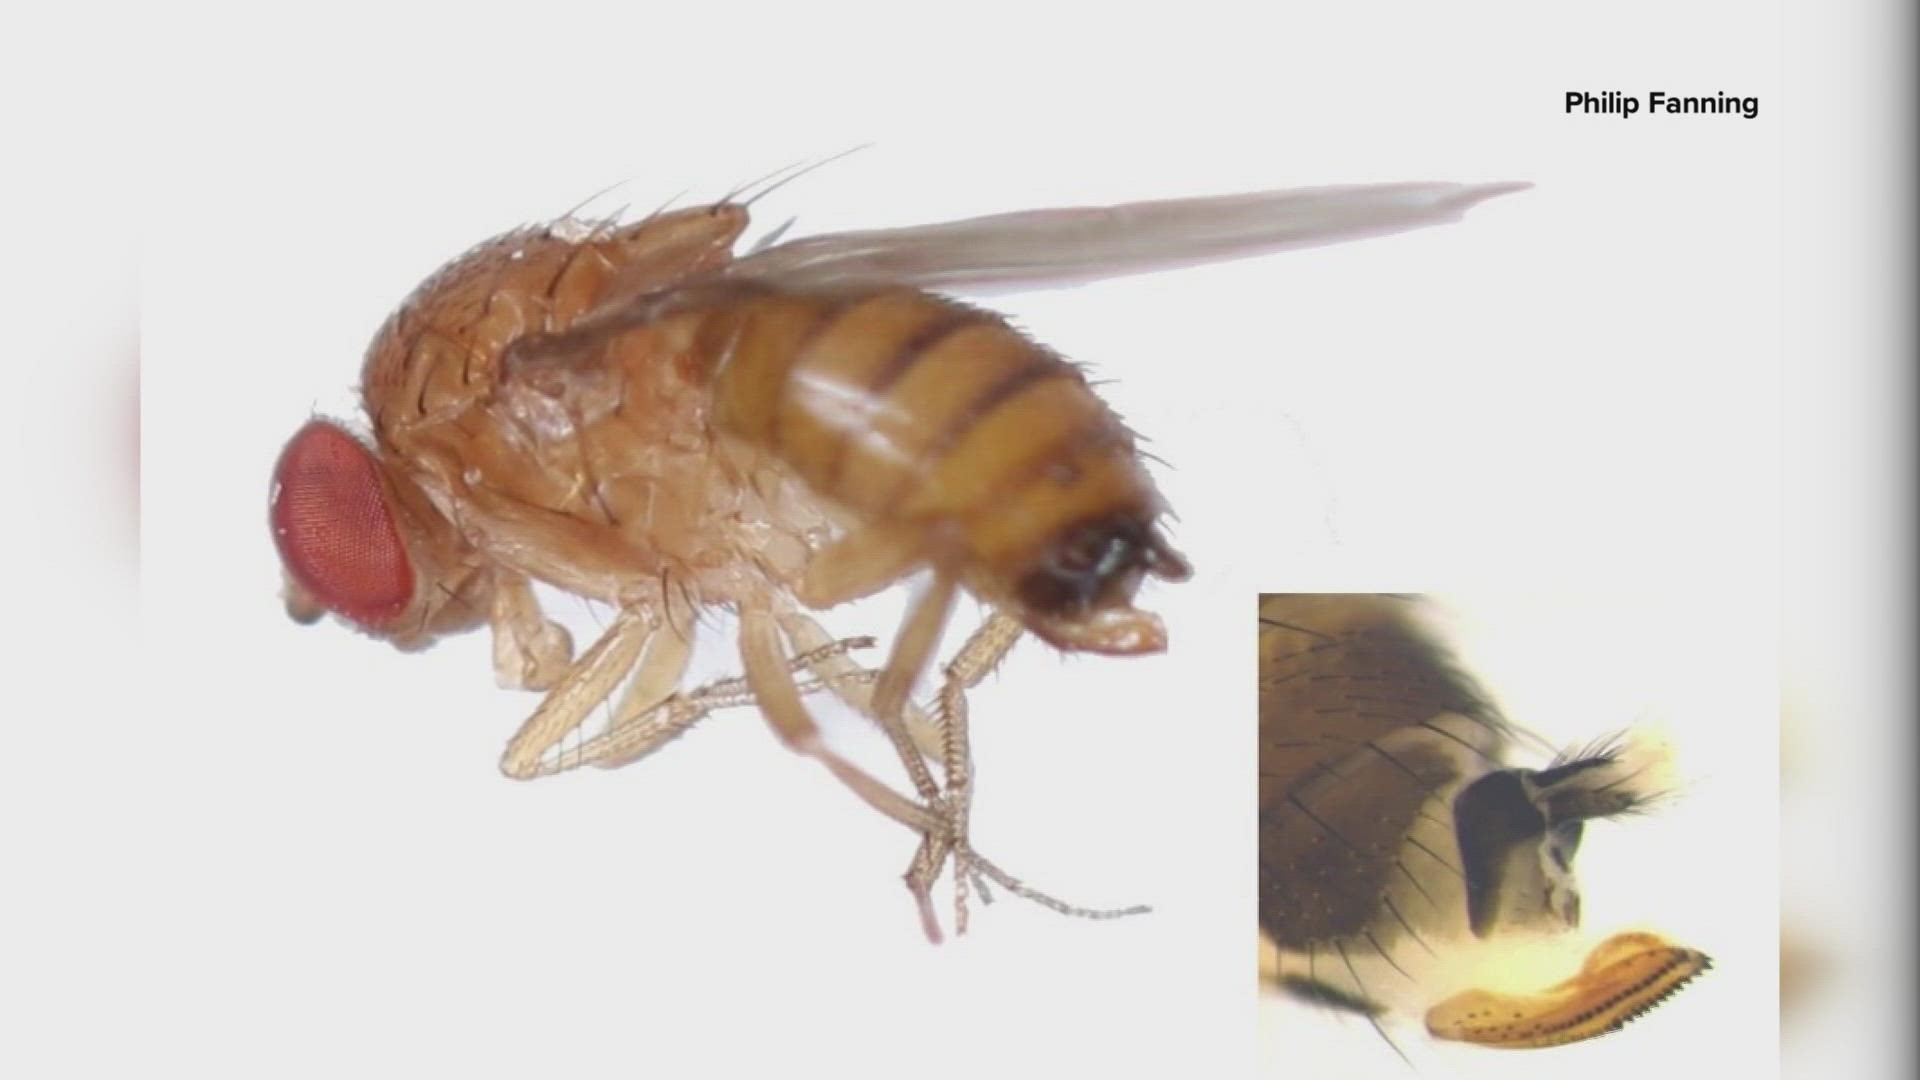 The spotted wing drosophila (SWD) has already damaged more than a billion dollars worth of crops across the country.